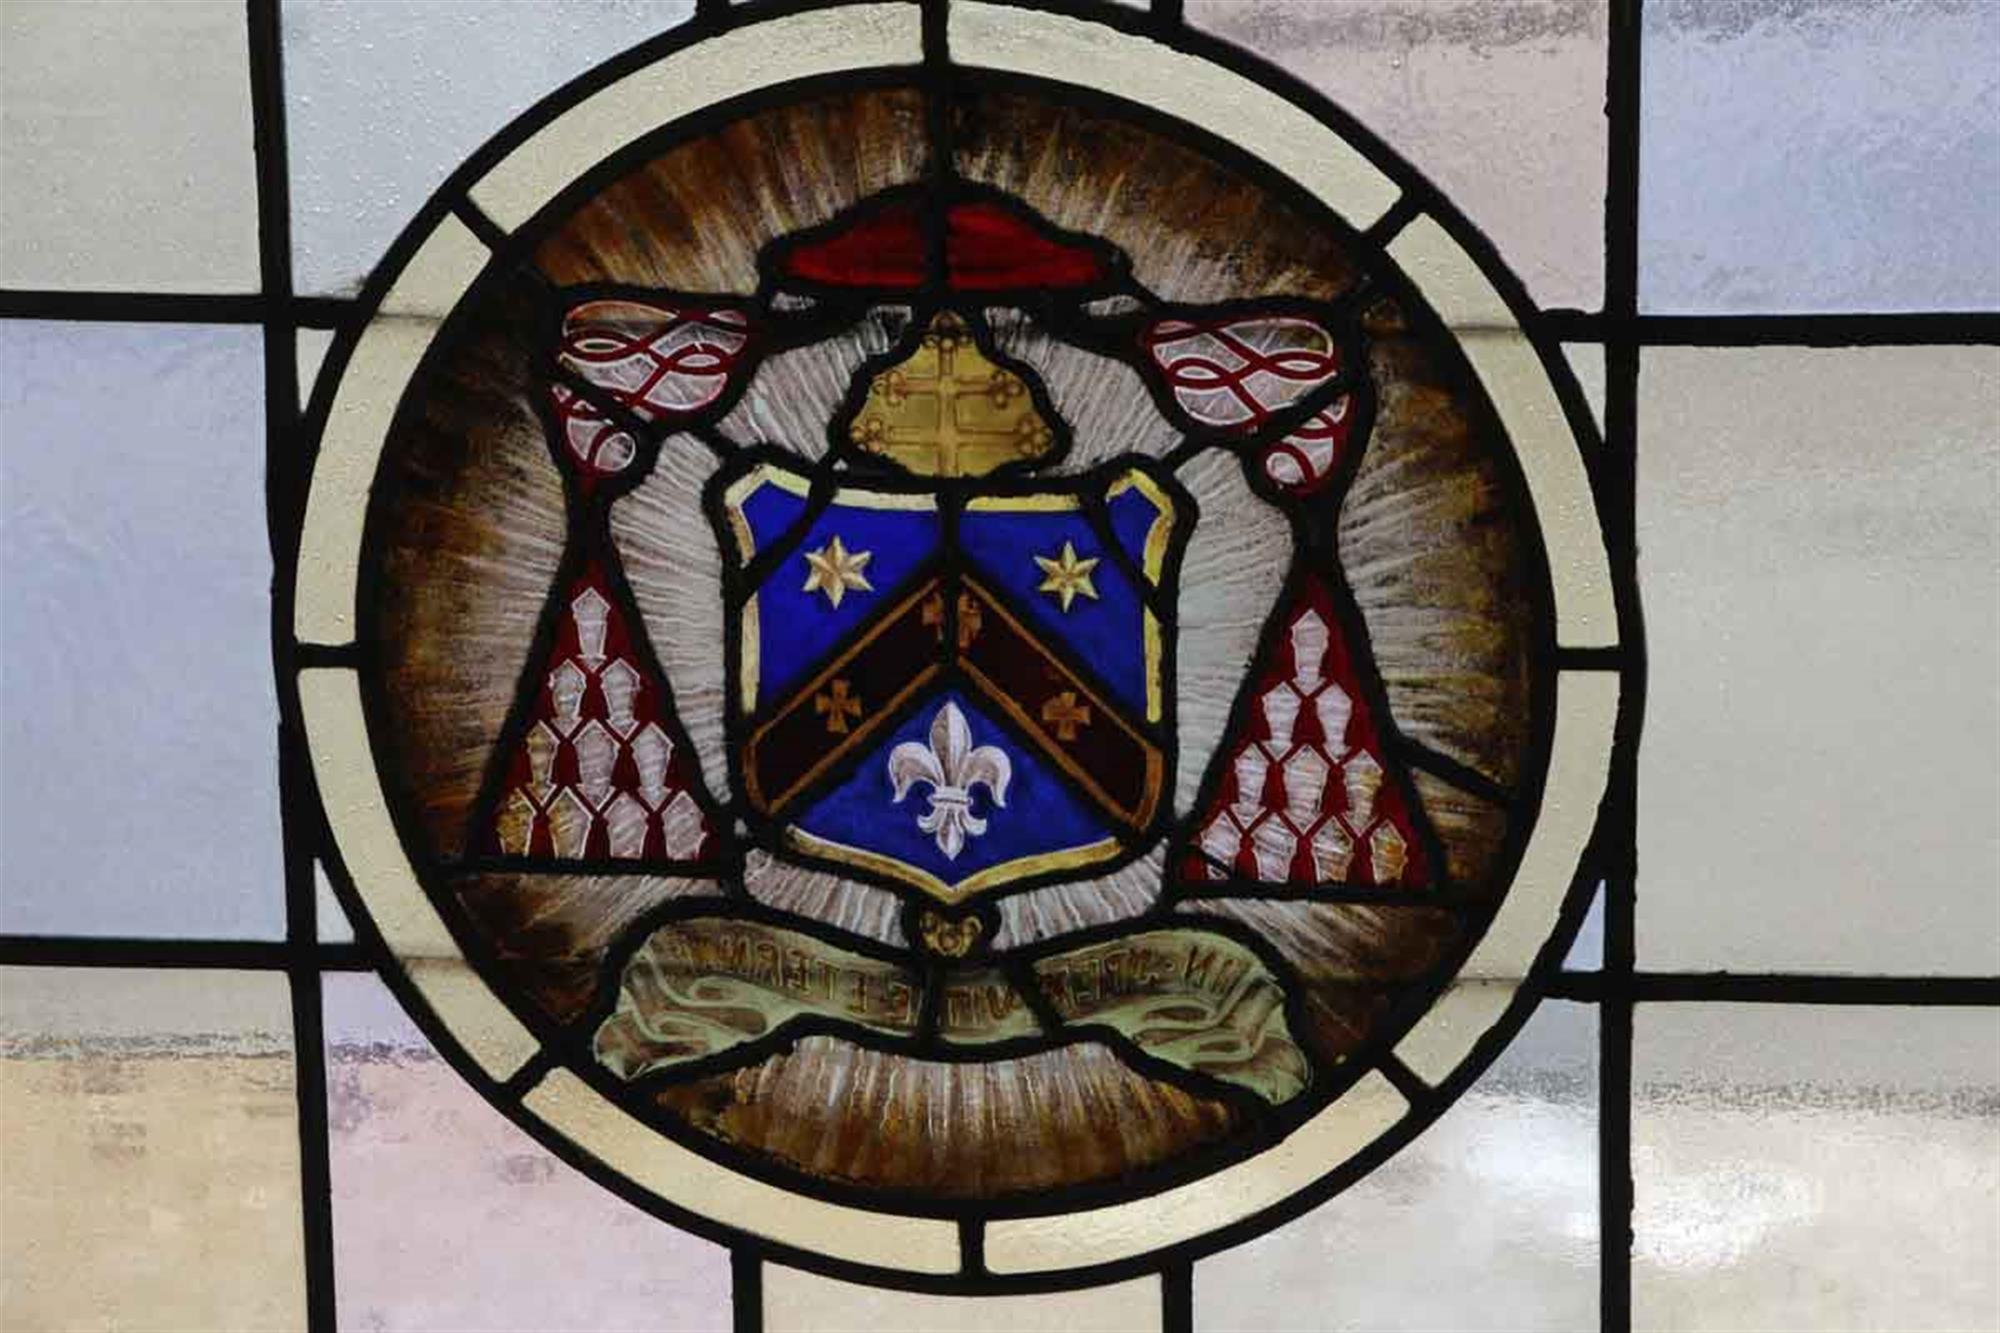 1910 Arts & Crafts wood framed stained glass window with a center shield, fleur de lis and star motif. The glass colors consist of soft hues of blue, green, pink and amber. Some stress cracks. This can be seen at our 400 Gilligan St location in